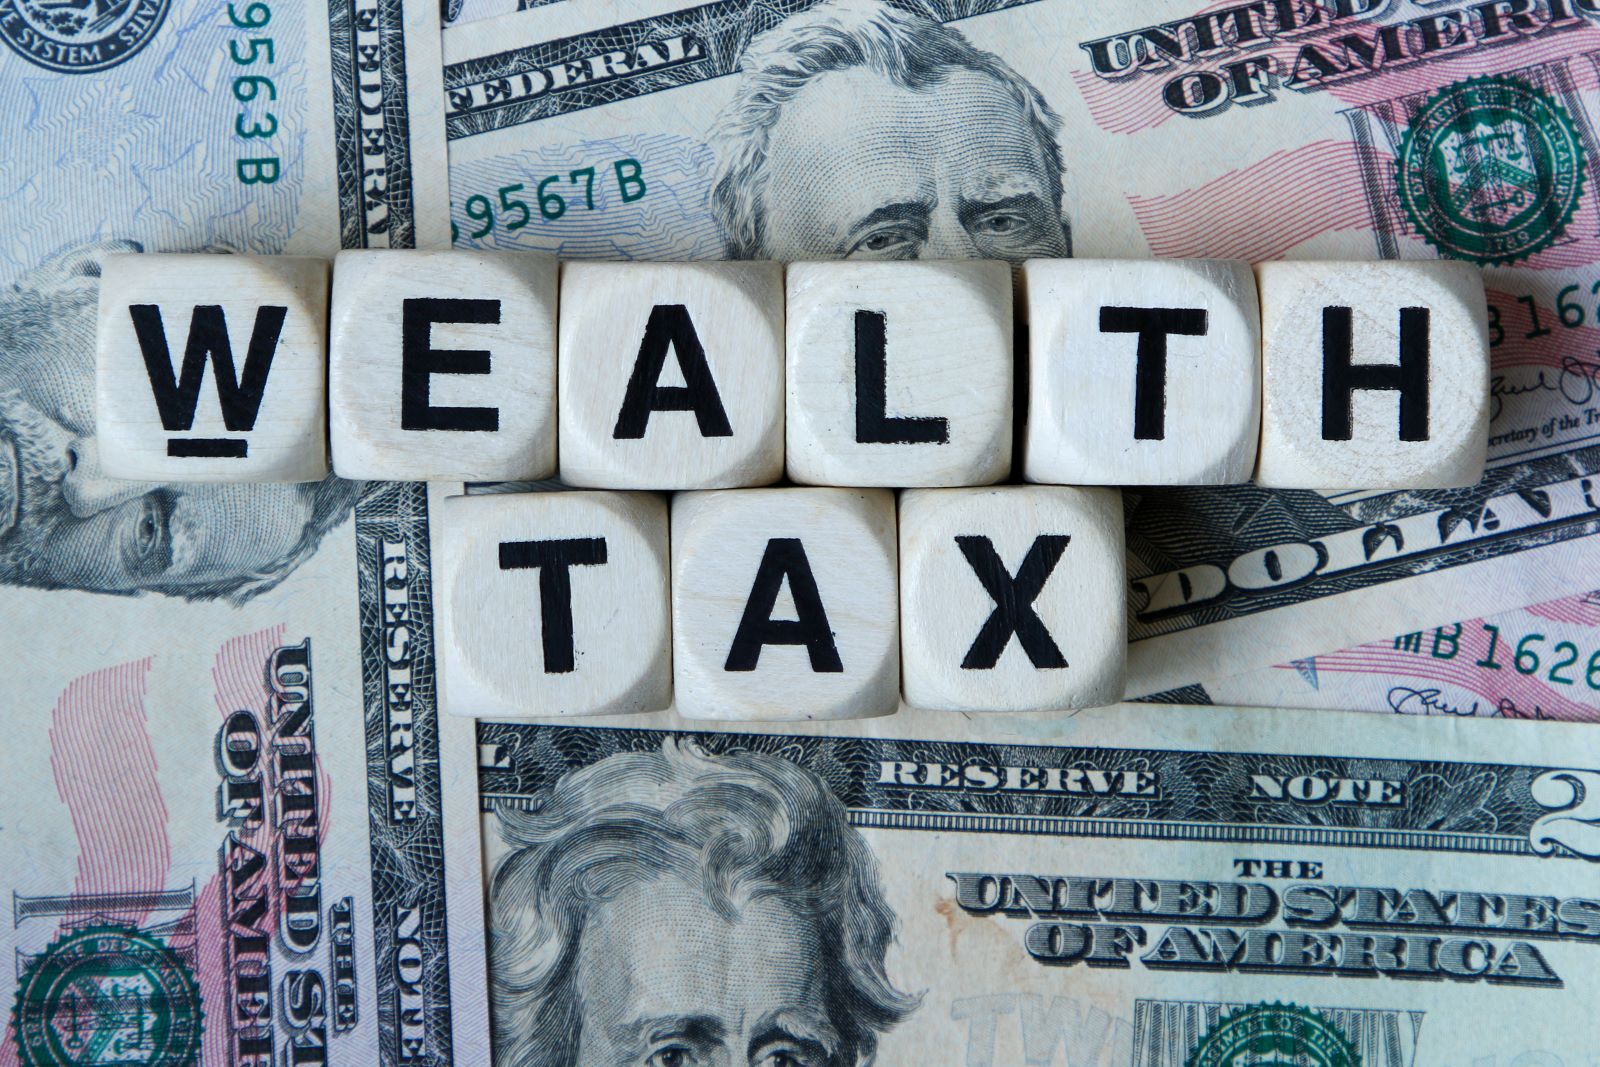 Image Credit: Shutterstock / Michael Leslie <p><span>Some of Biden’s proposals are:</span></p>  <span>Minimum Tax for the Wealthy: People with over $100 million in wealth would be required to pay at least 25% of their total income as taxes. This rule is meant to reduce economic gaps and bring in more tax revenue.</span>